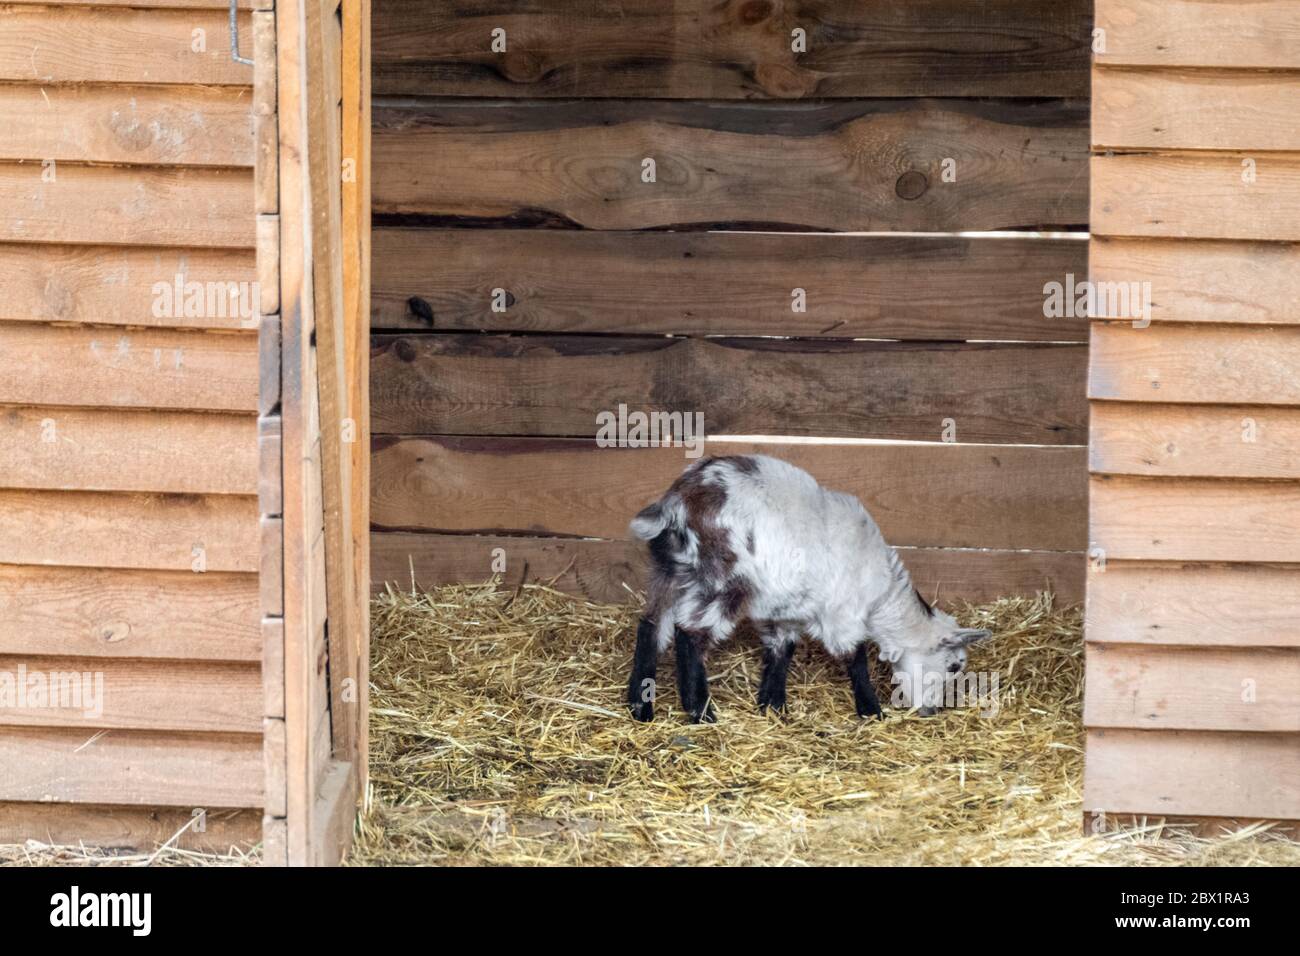 A cute baby white with black dots goat standing eating on straw bedding in an animal farm pen Stock Photo